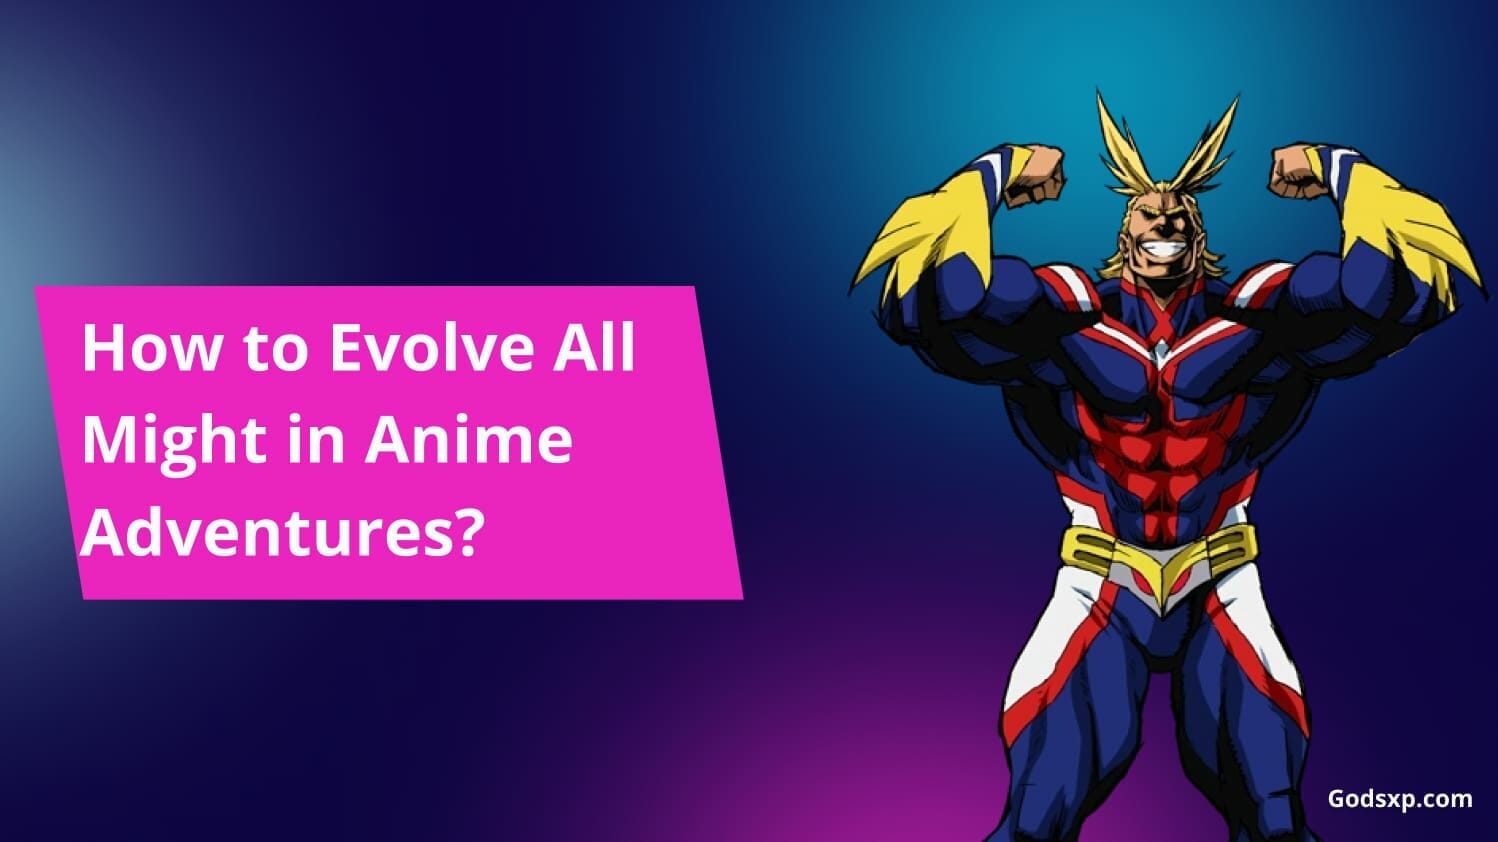 ALL CSM* EVOLVED MYTHICALS SHOWCASE! IN ANIME ADVENTURE! 